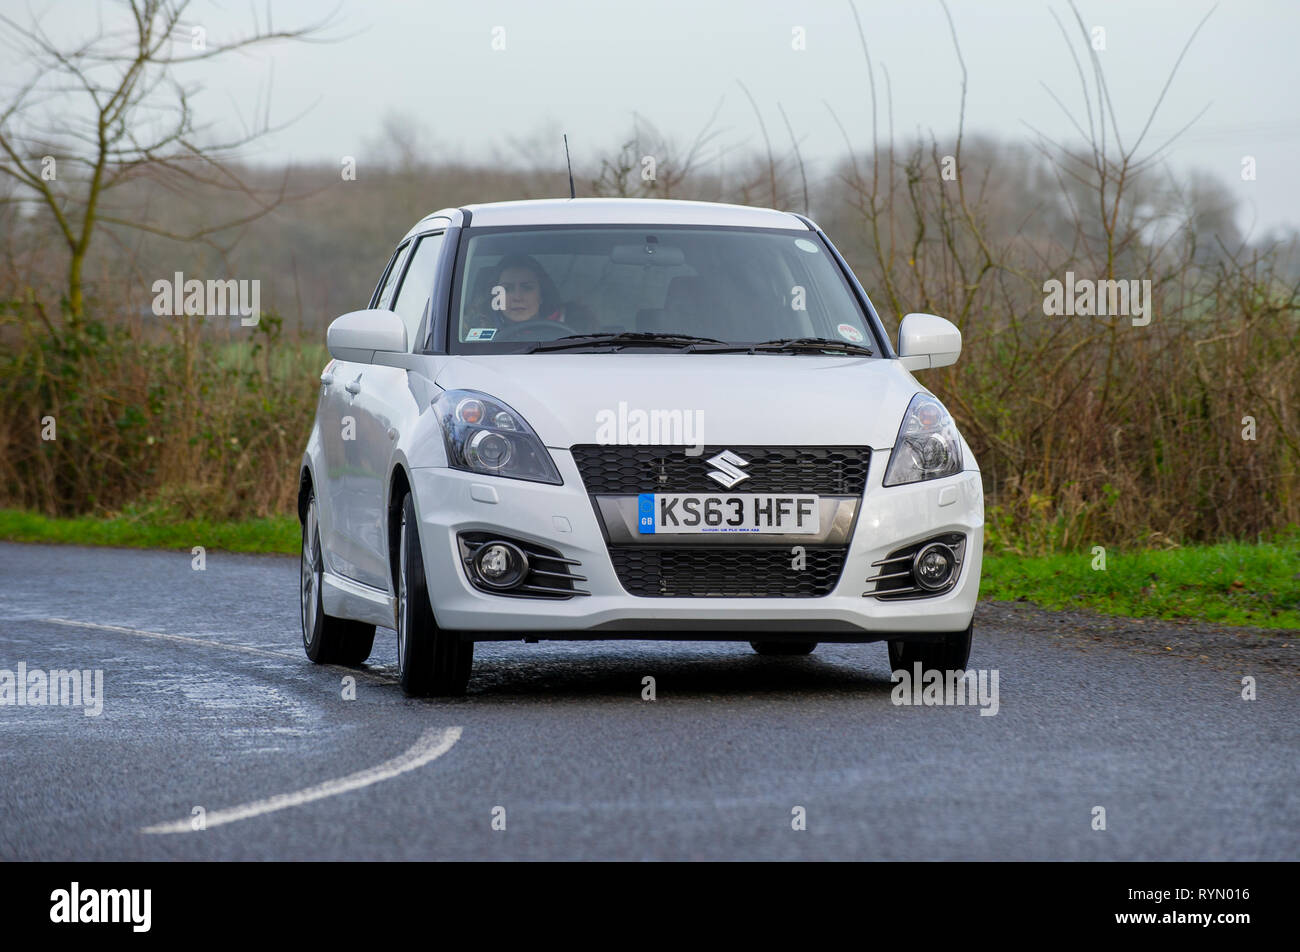 Review: The Suzuki Swift Sport Is a Delightfully Odd Tiny Hot Hatch